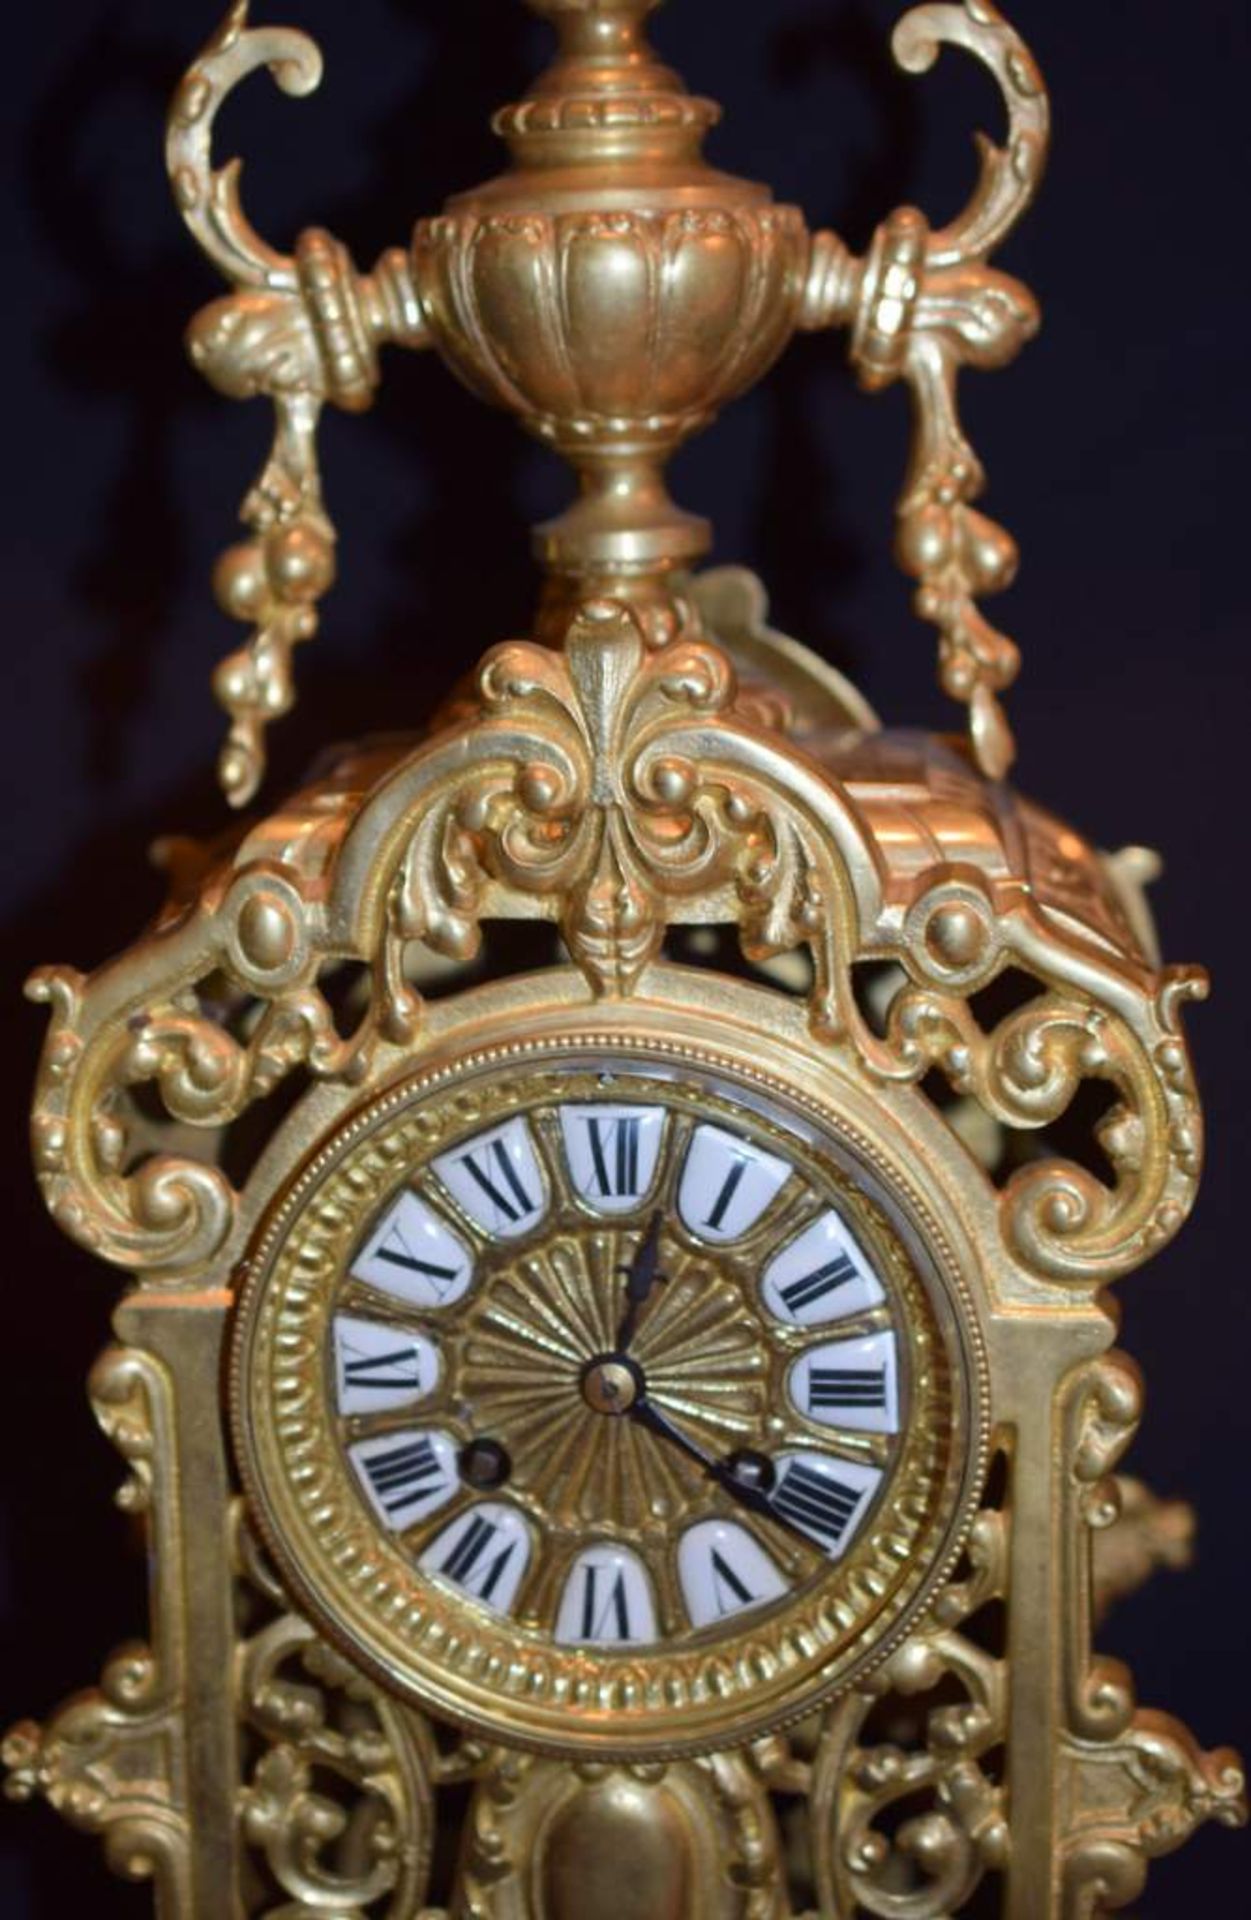 Excellent French Empire Bronze Clock c1850 - Image 2 of 4